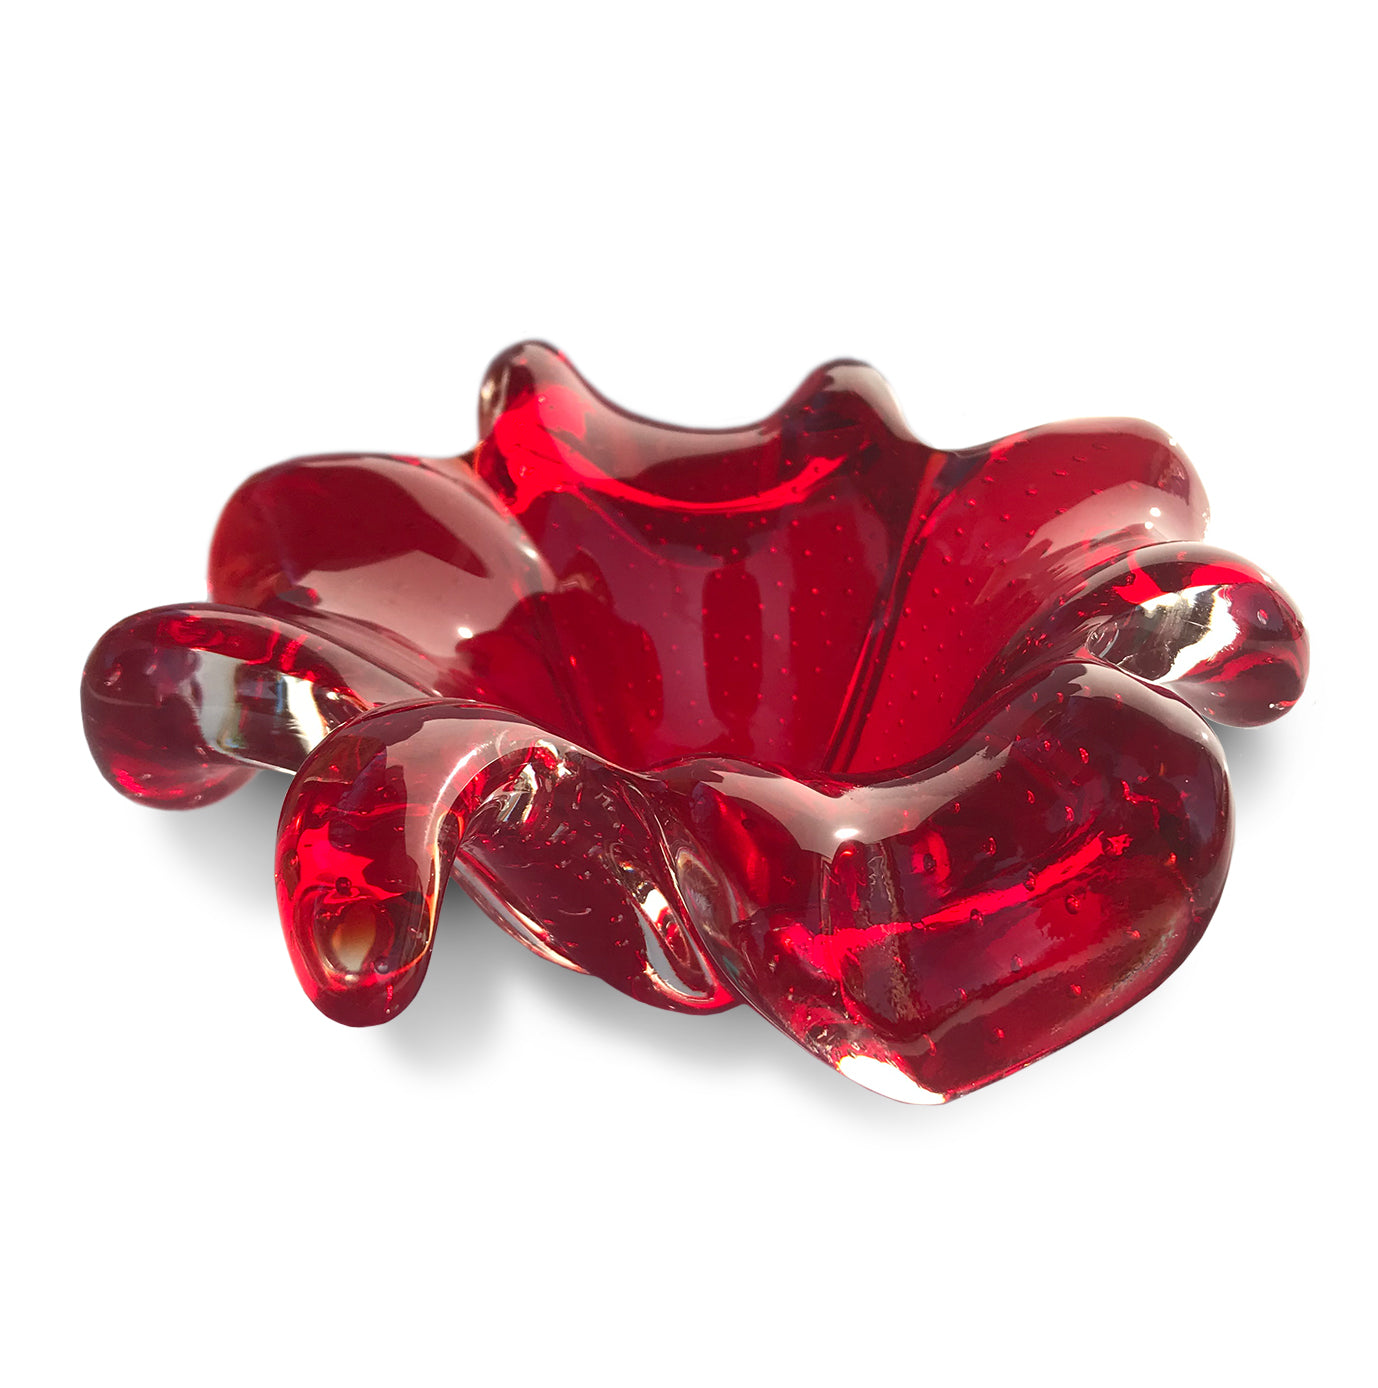 Bright red Murano Art Glass bubble vase - SHOP NOW - www.intovintage.co.uk